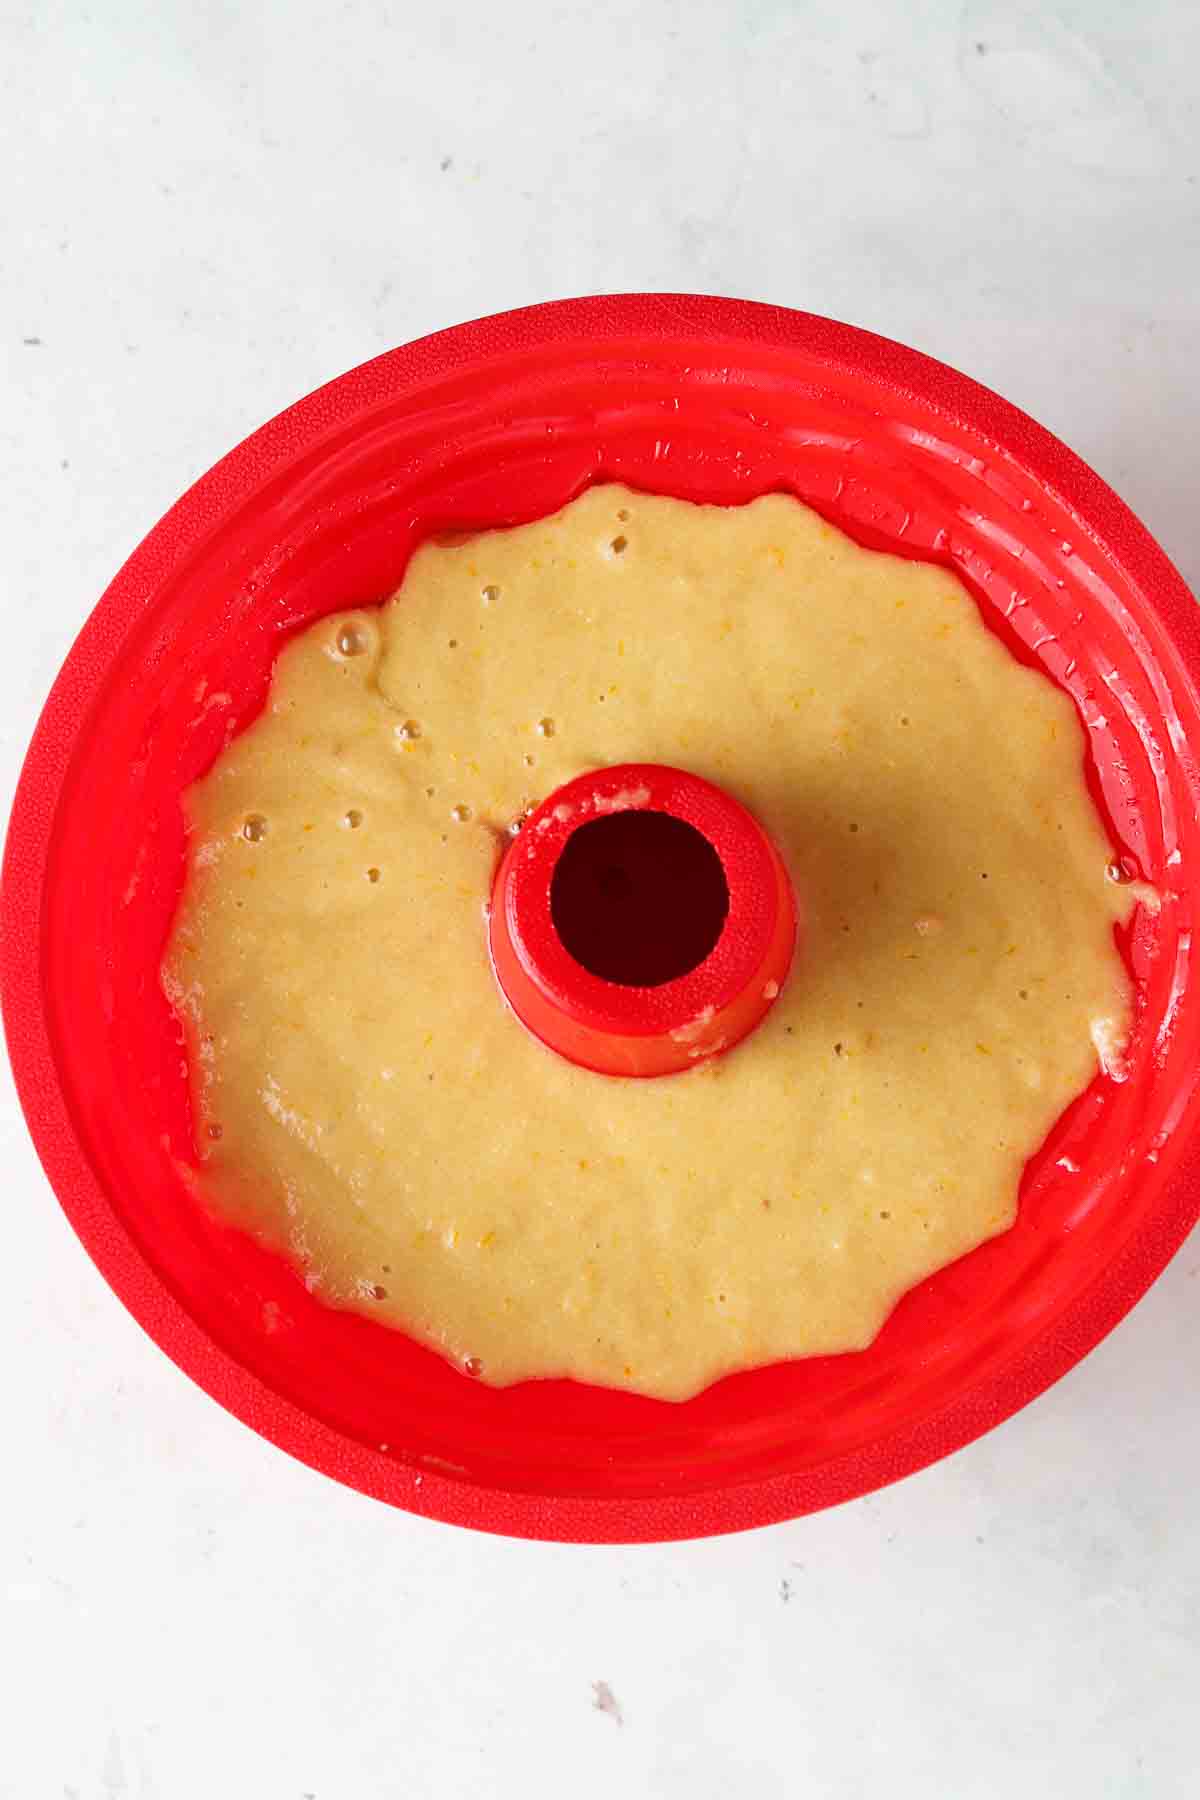 Cake mixture in a red silicone bundt pan.